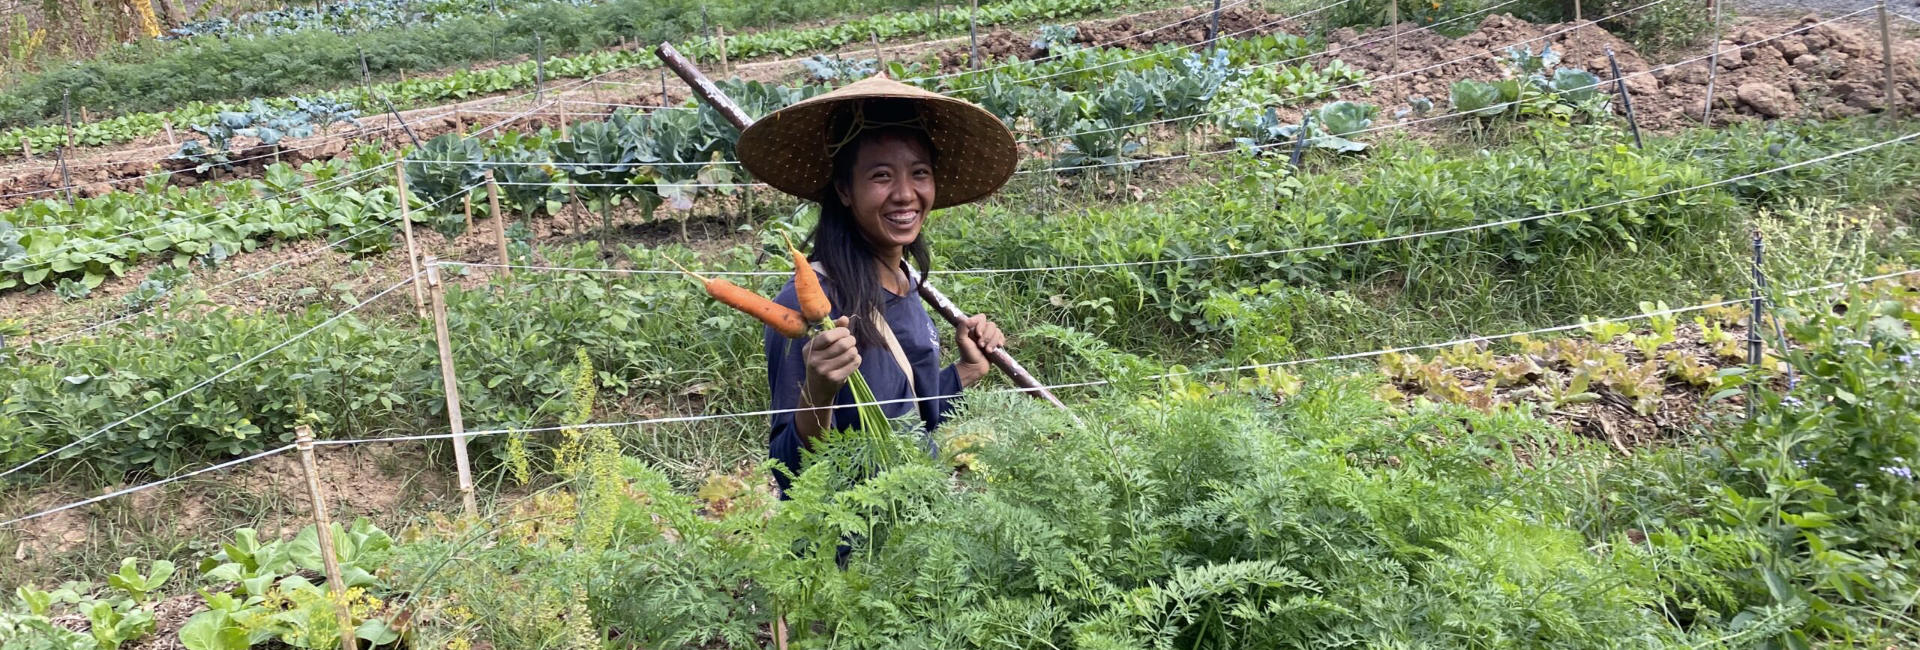 A woman in a straw hat is holding carrots in a garden in Luang Prabang.